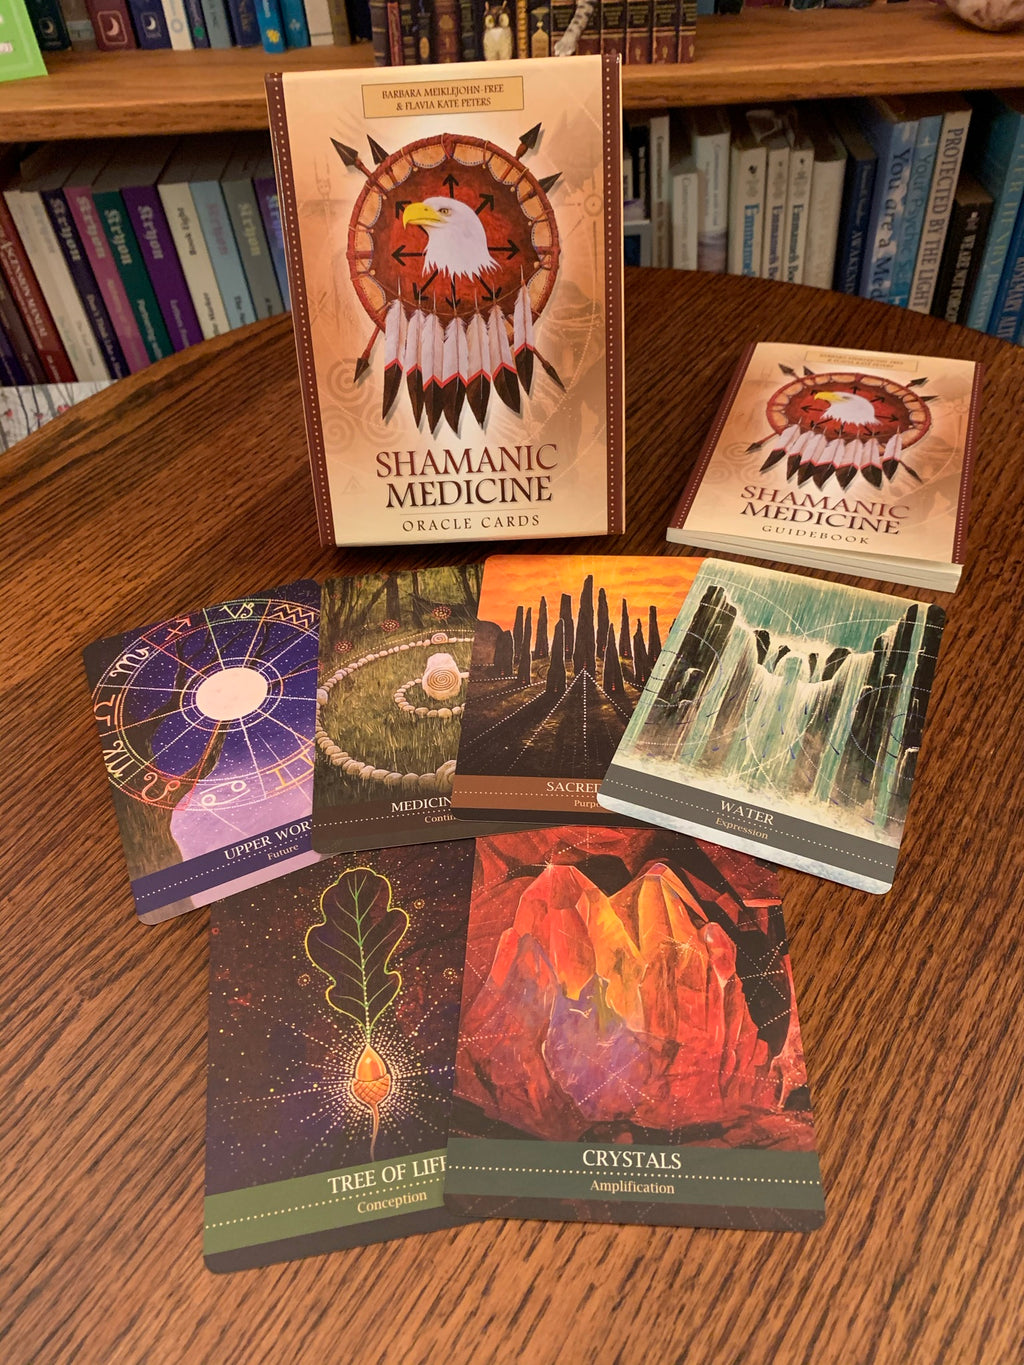 Shamanic Medicine Oracle Cards consist of 50 oracle cards, a guidebook, and a box for storing them. Gorgeous illustrations (by Yuri Leitch) accompany the beautiful insights and writings of the authors: Barbara Meiklejohn-Free & Flavia Kate Peters. Use these cards for "wise counsel, divination and a fuller understanding of the medicine of each card." This is a very powerful deck.  Price is $23.95.